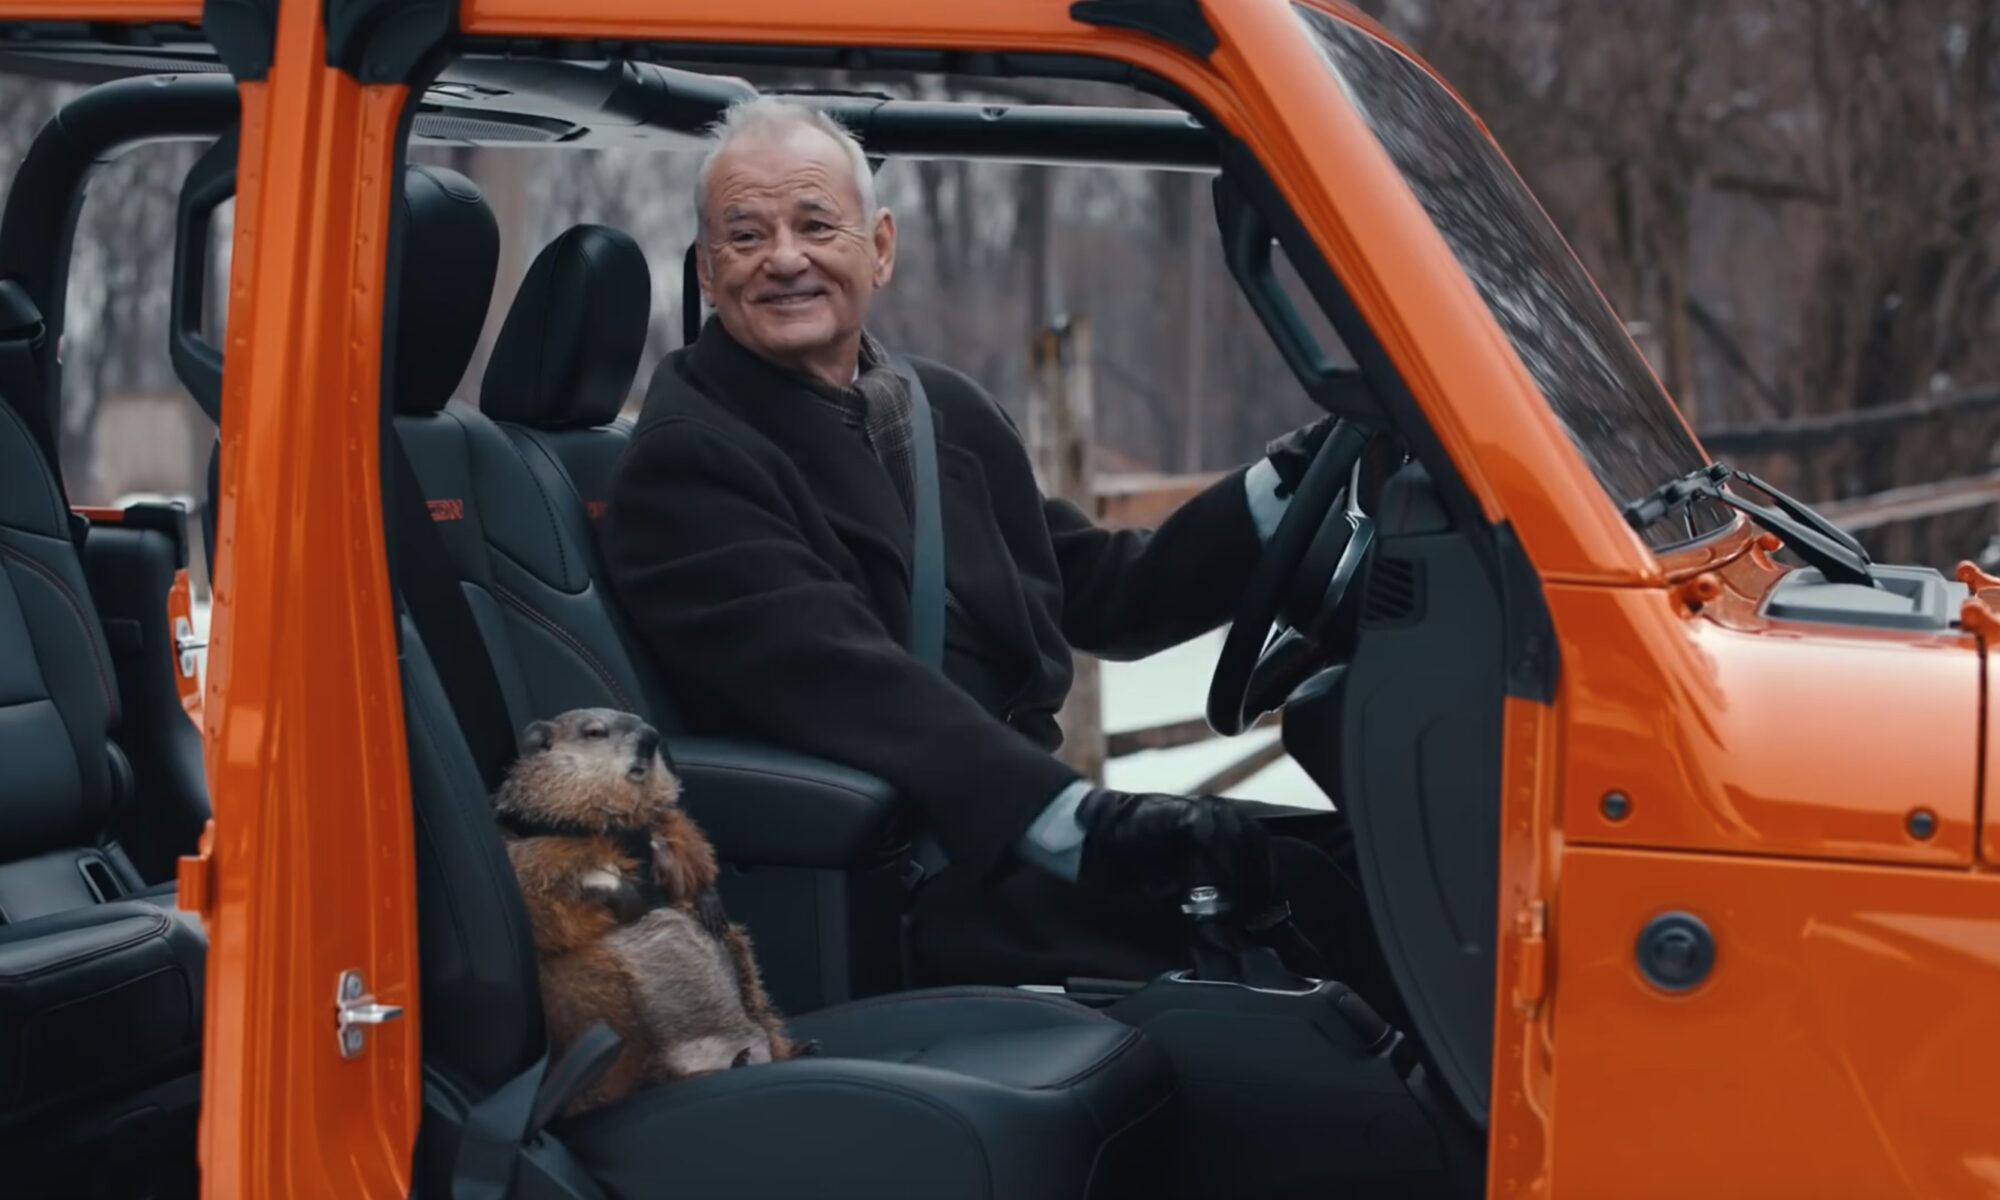 Jeep Groundhog Day ad with Bill Murray